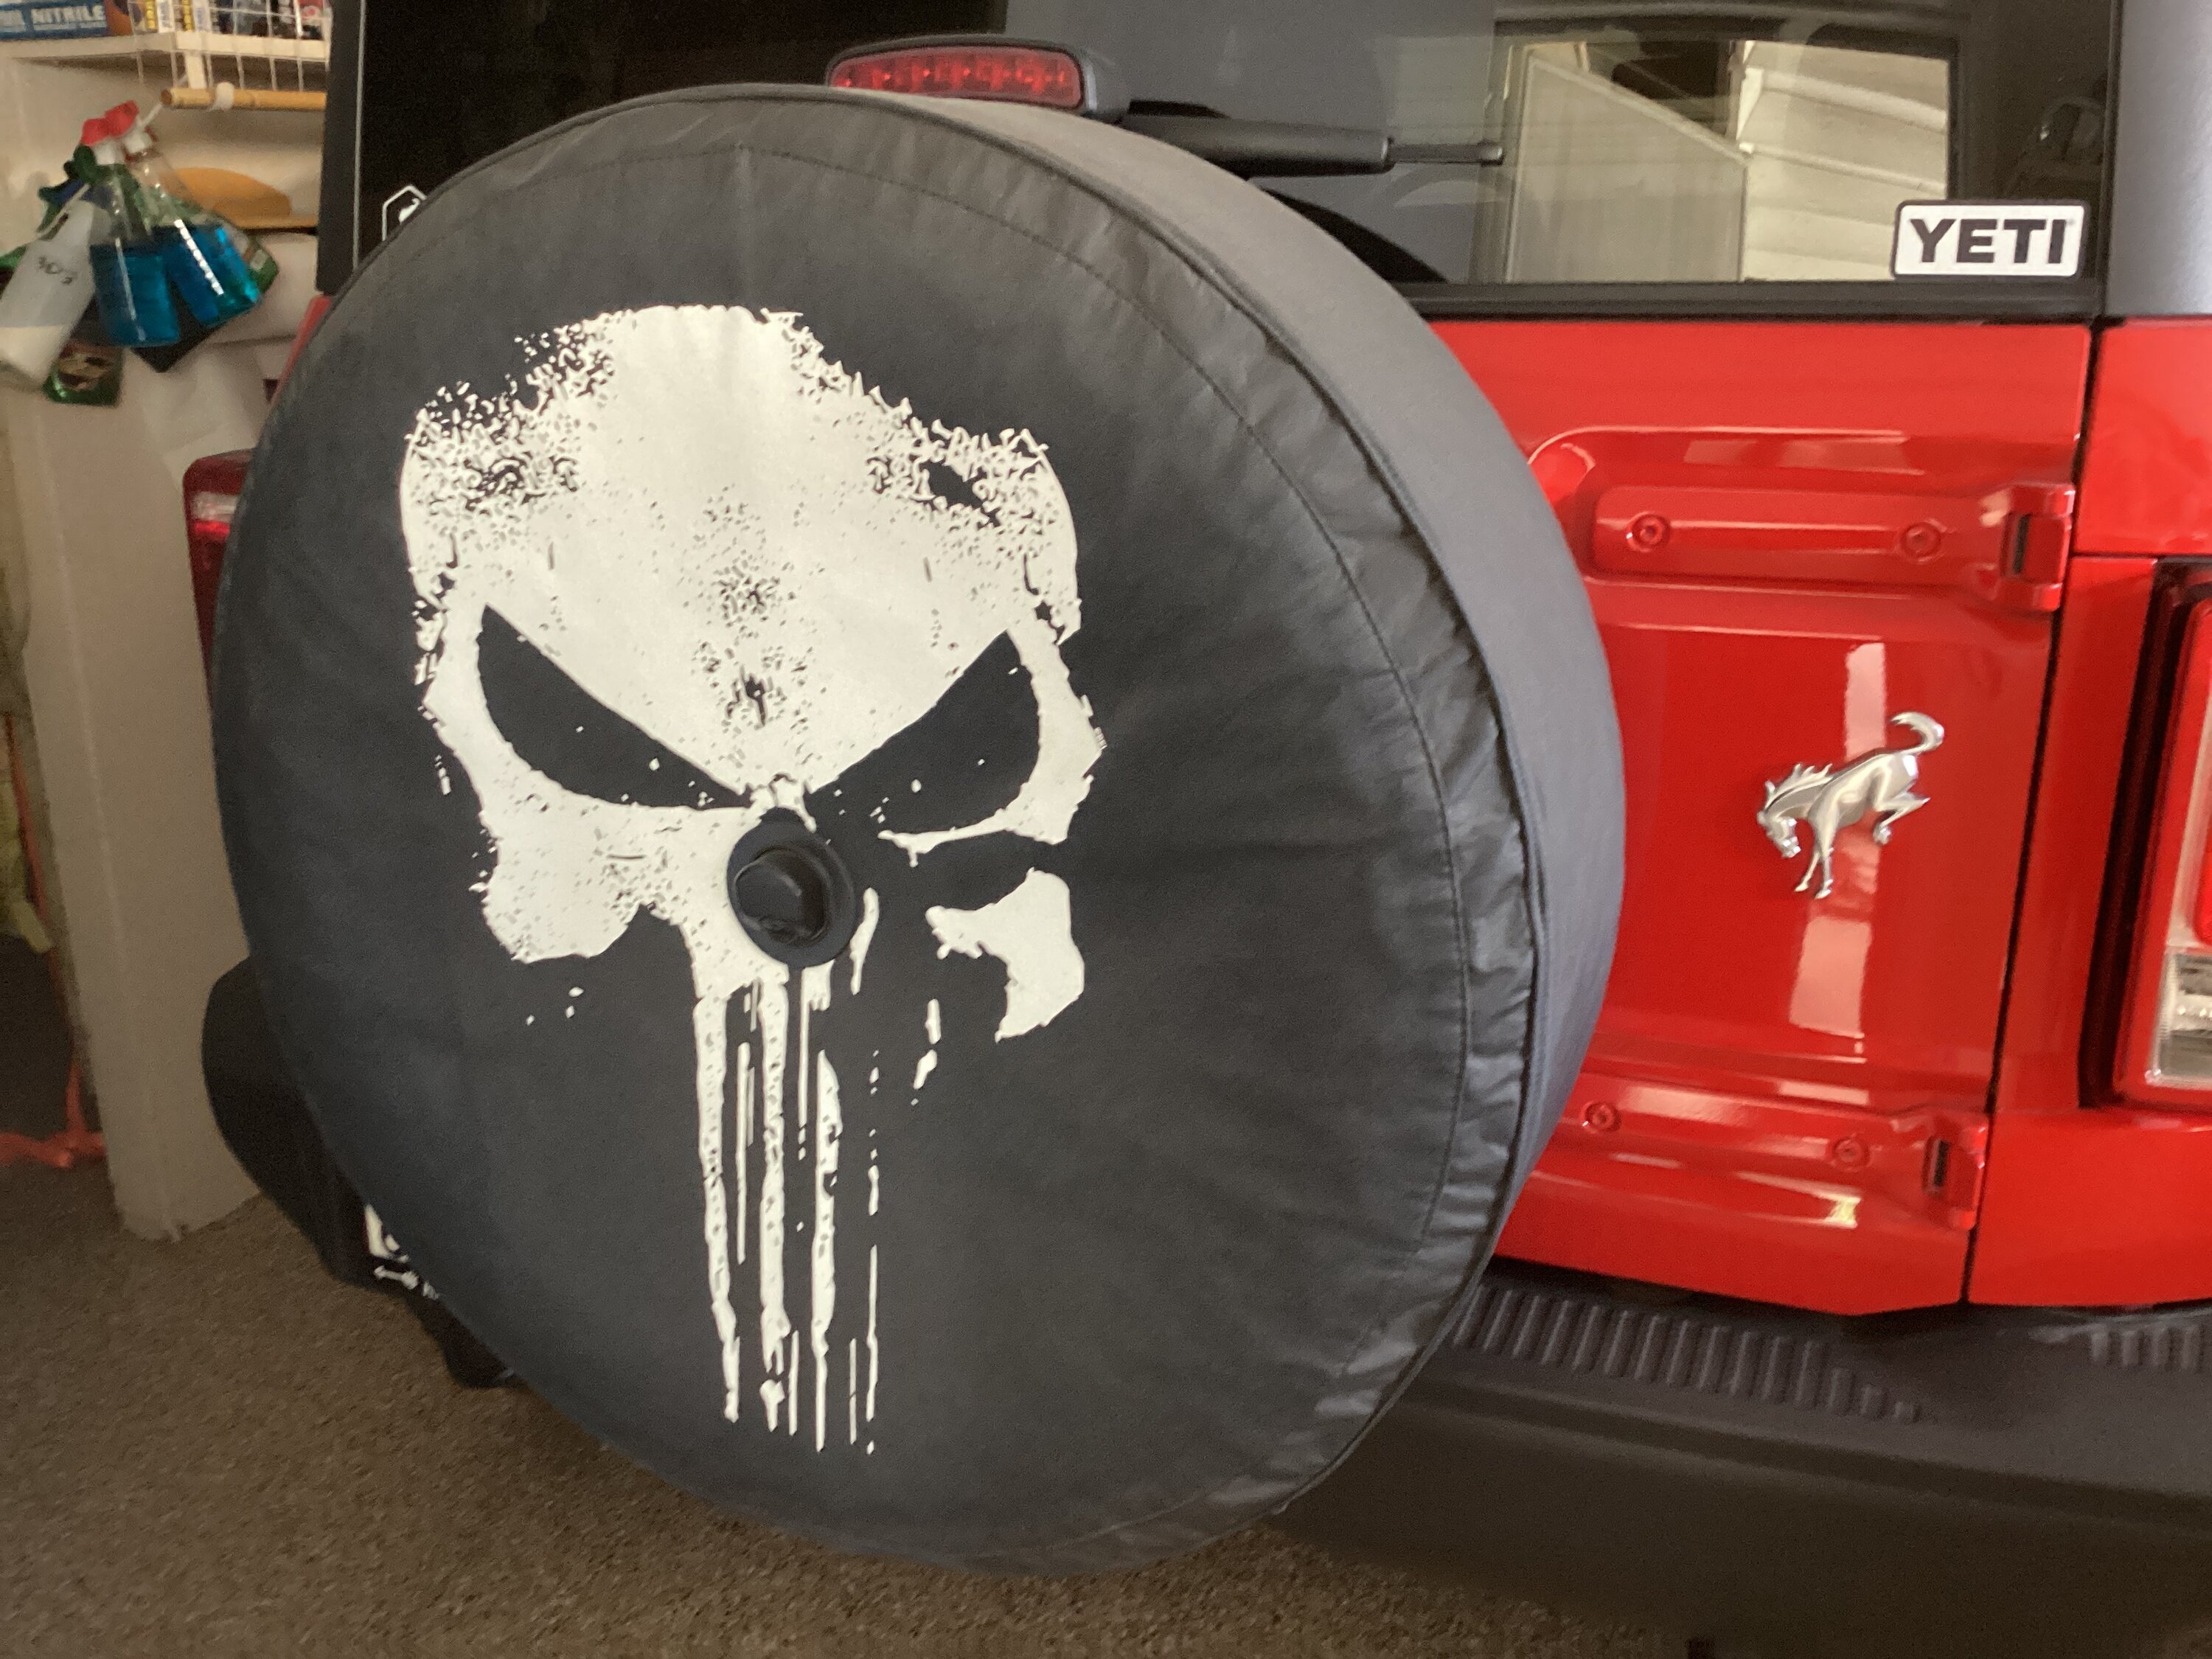 Ford Bronco Spare Tire Covers -- post yours image